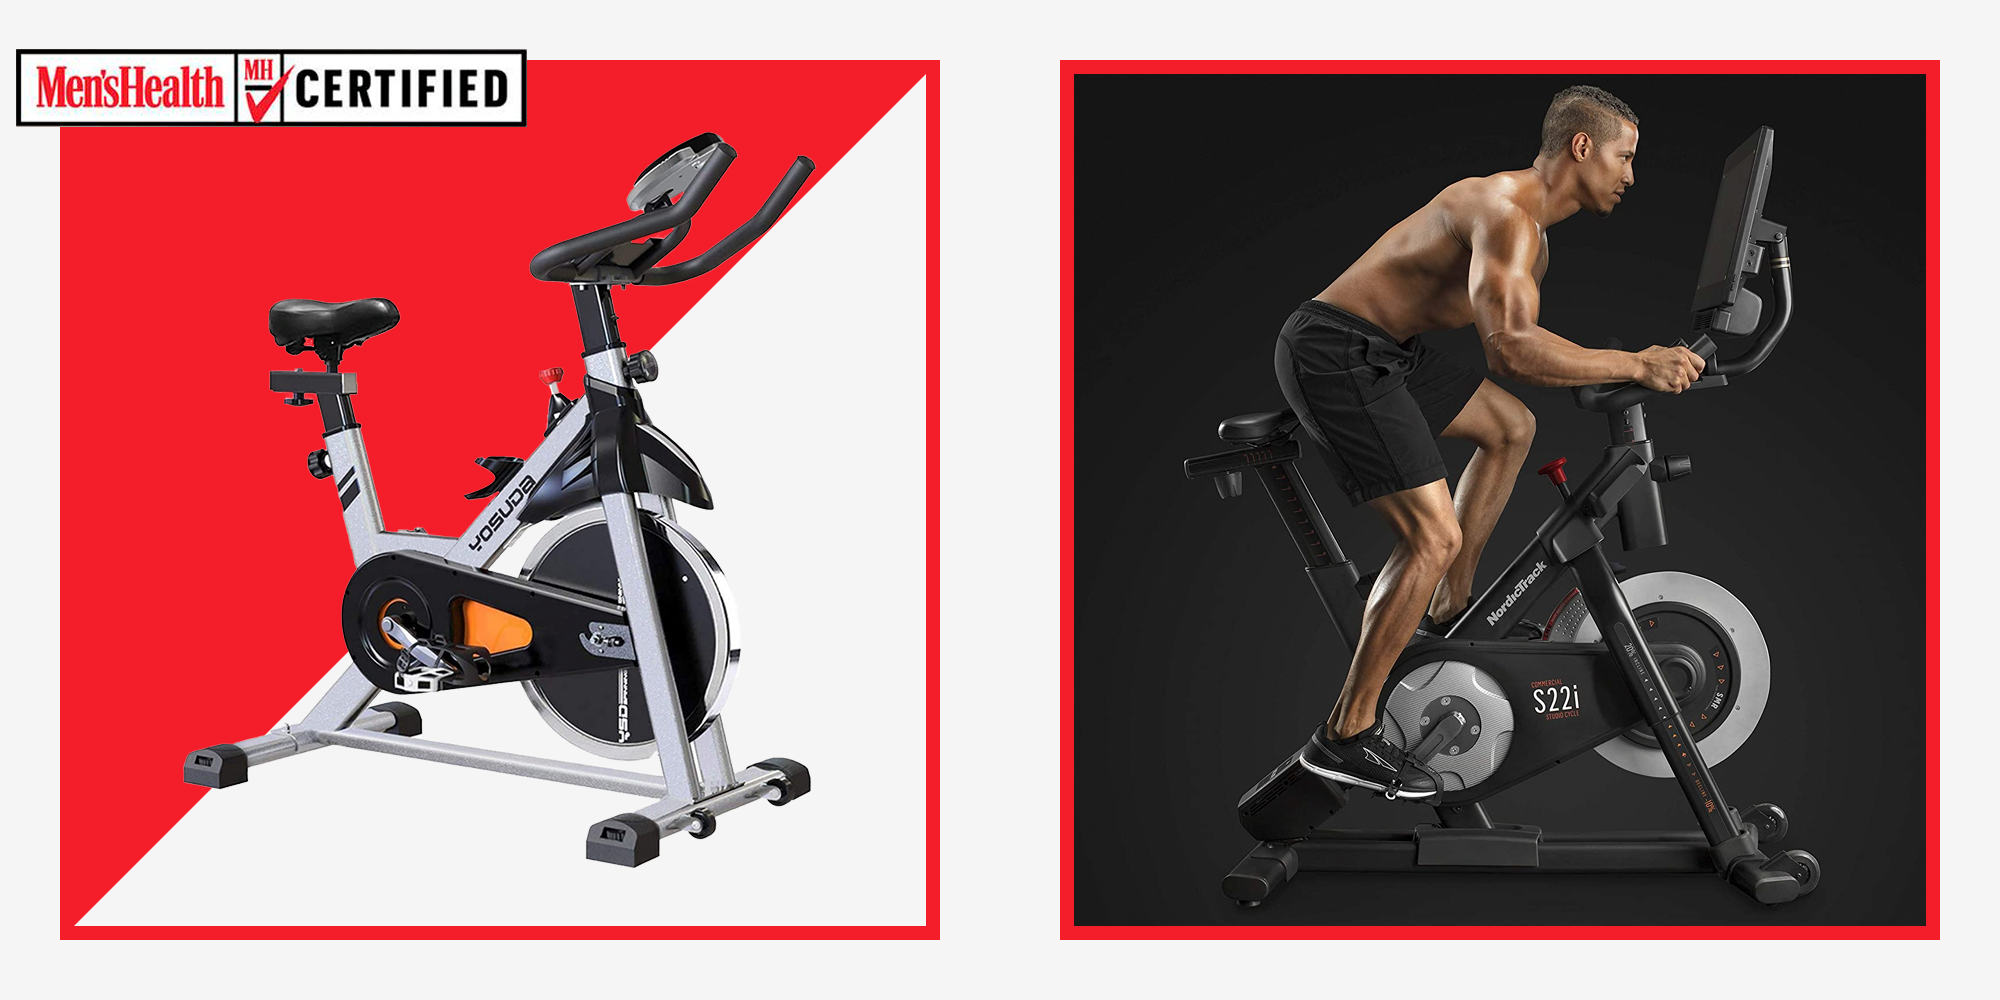 9 best workout equipment you need for your home gym this year